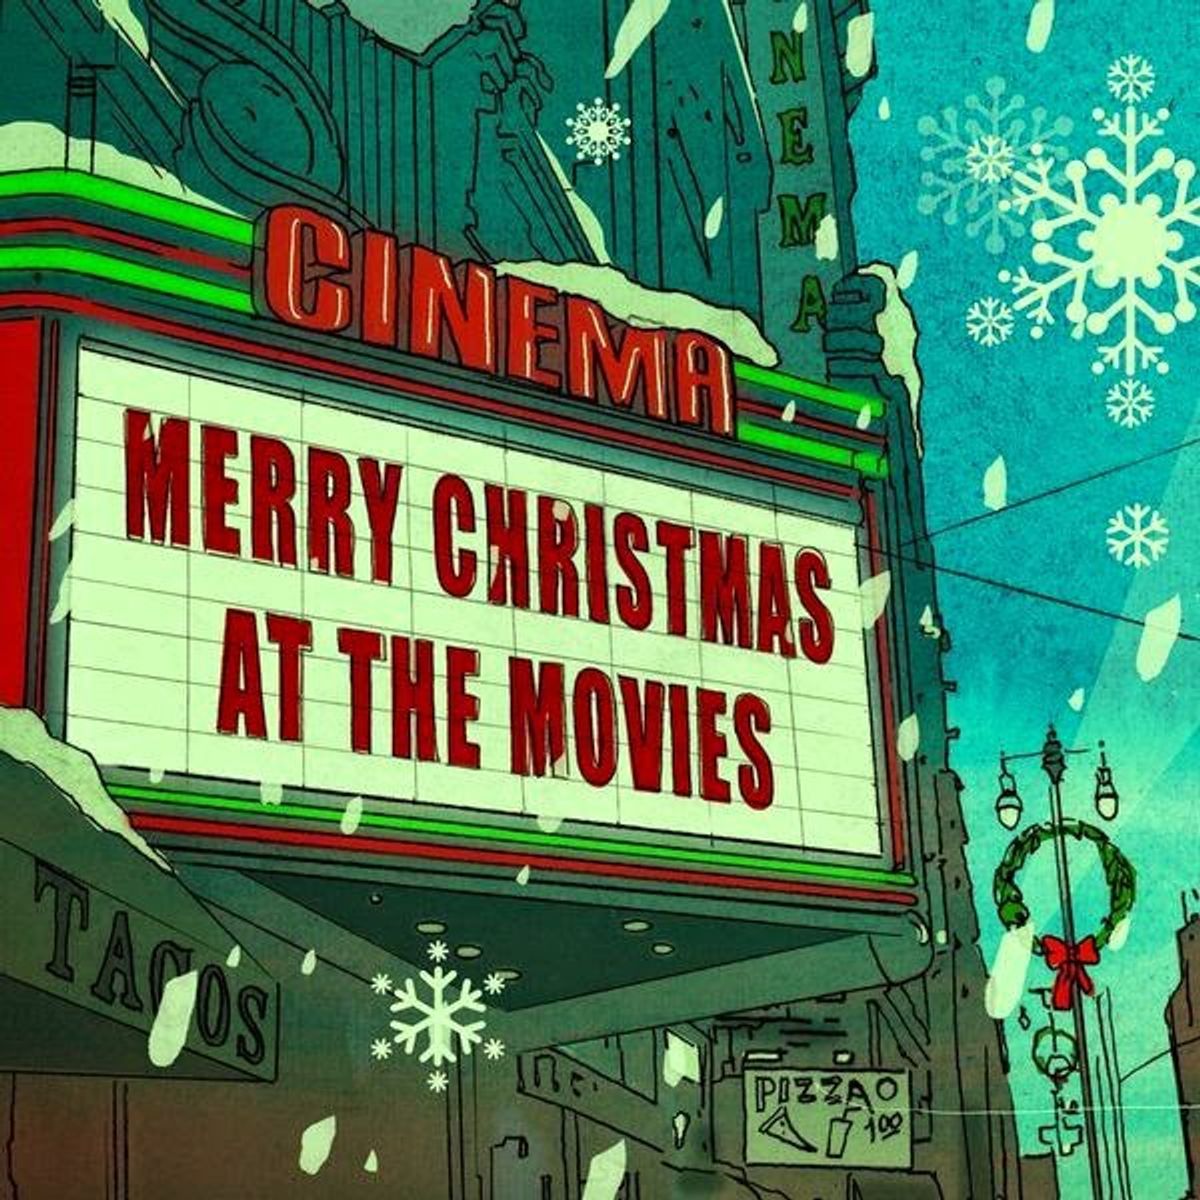 The Best Christmas Movies From The Guy Who Doesn't Like Christmas